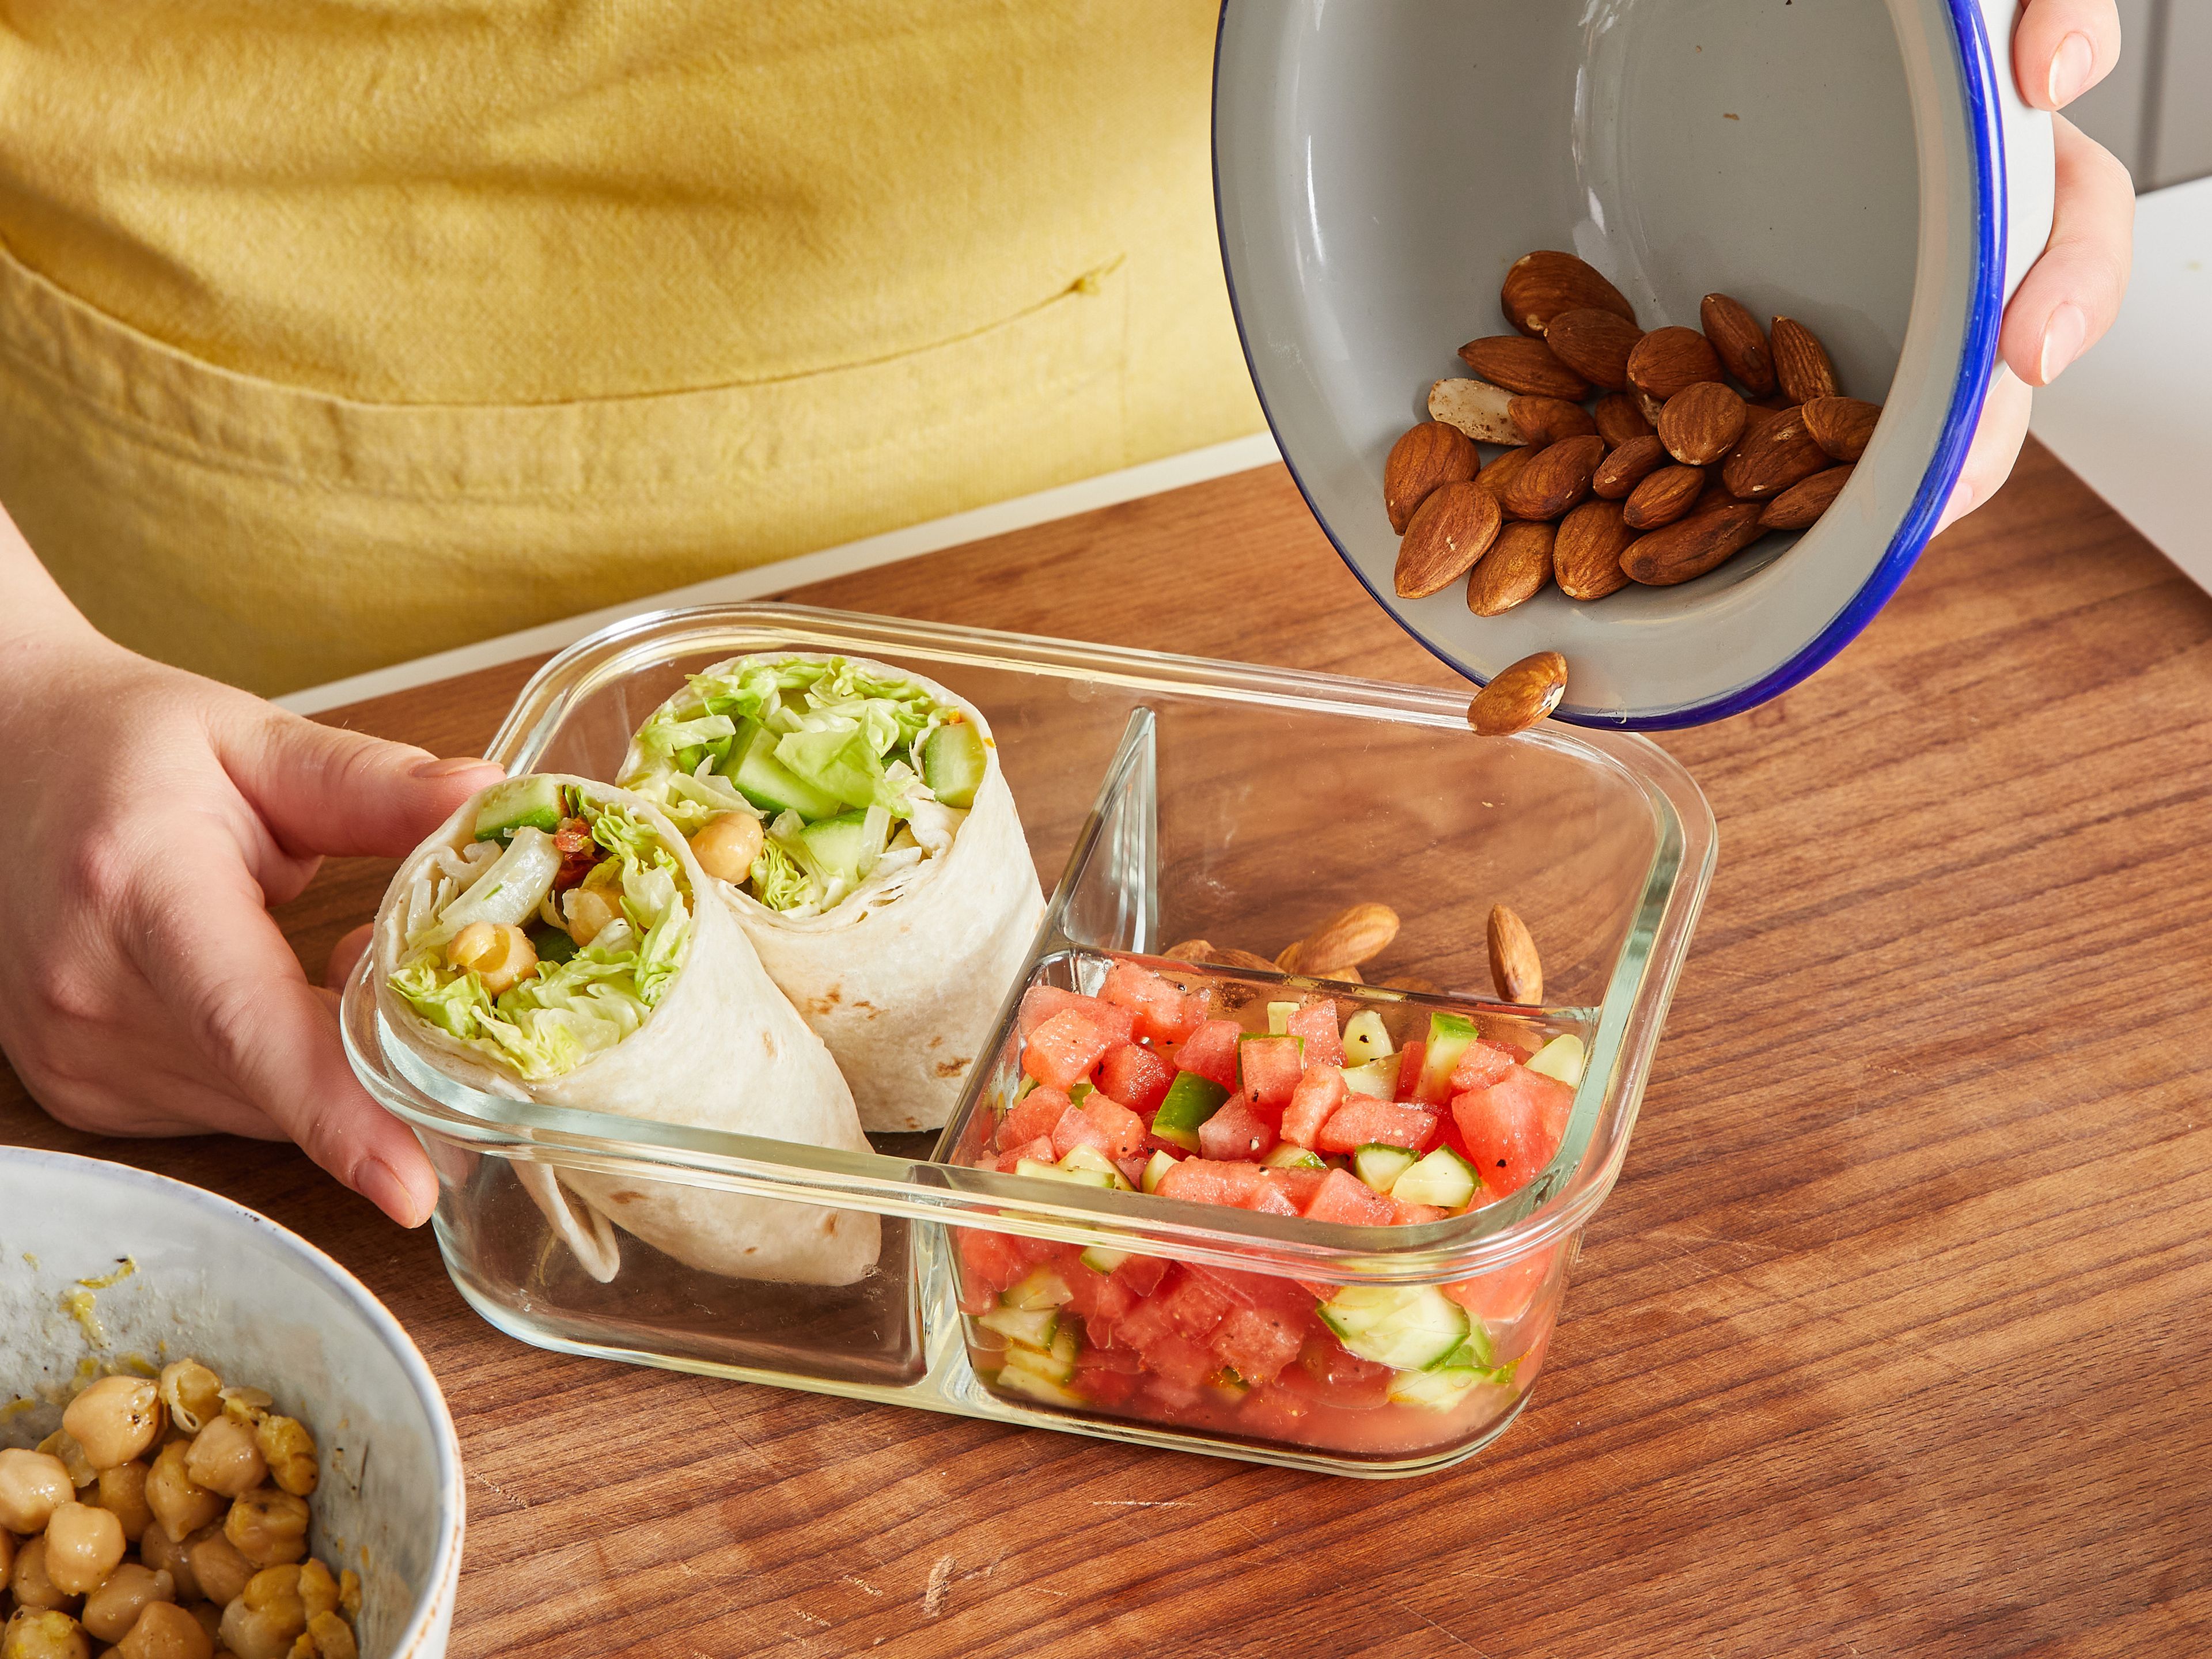 For the first lunch box: Mix diced cucumber and melon with remaining olive oil and some juice of the remaining, halved zested lemon; season with salt and pepper. Pour into a small compartment of a divided lunch box. Spread two tortilla wraps with 1 tbsp of the yogurt cream. Then top evenly with ⅓ of the lettuce leaves, ⅓ of the coarse diced cucumber, half of the sun-dried tomatoes, and half of the whole chickpeas. Roll up tightly and cut in half, then pack into the lunch box. Put the remaining whole almonds into a small compartment of the lunch box.